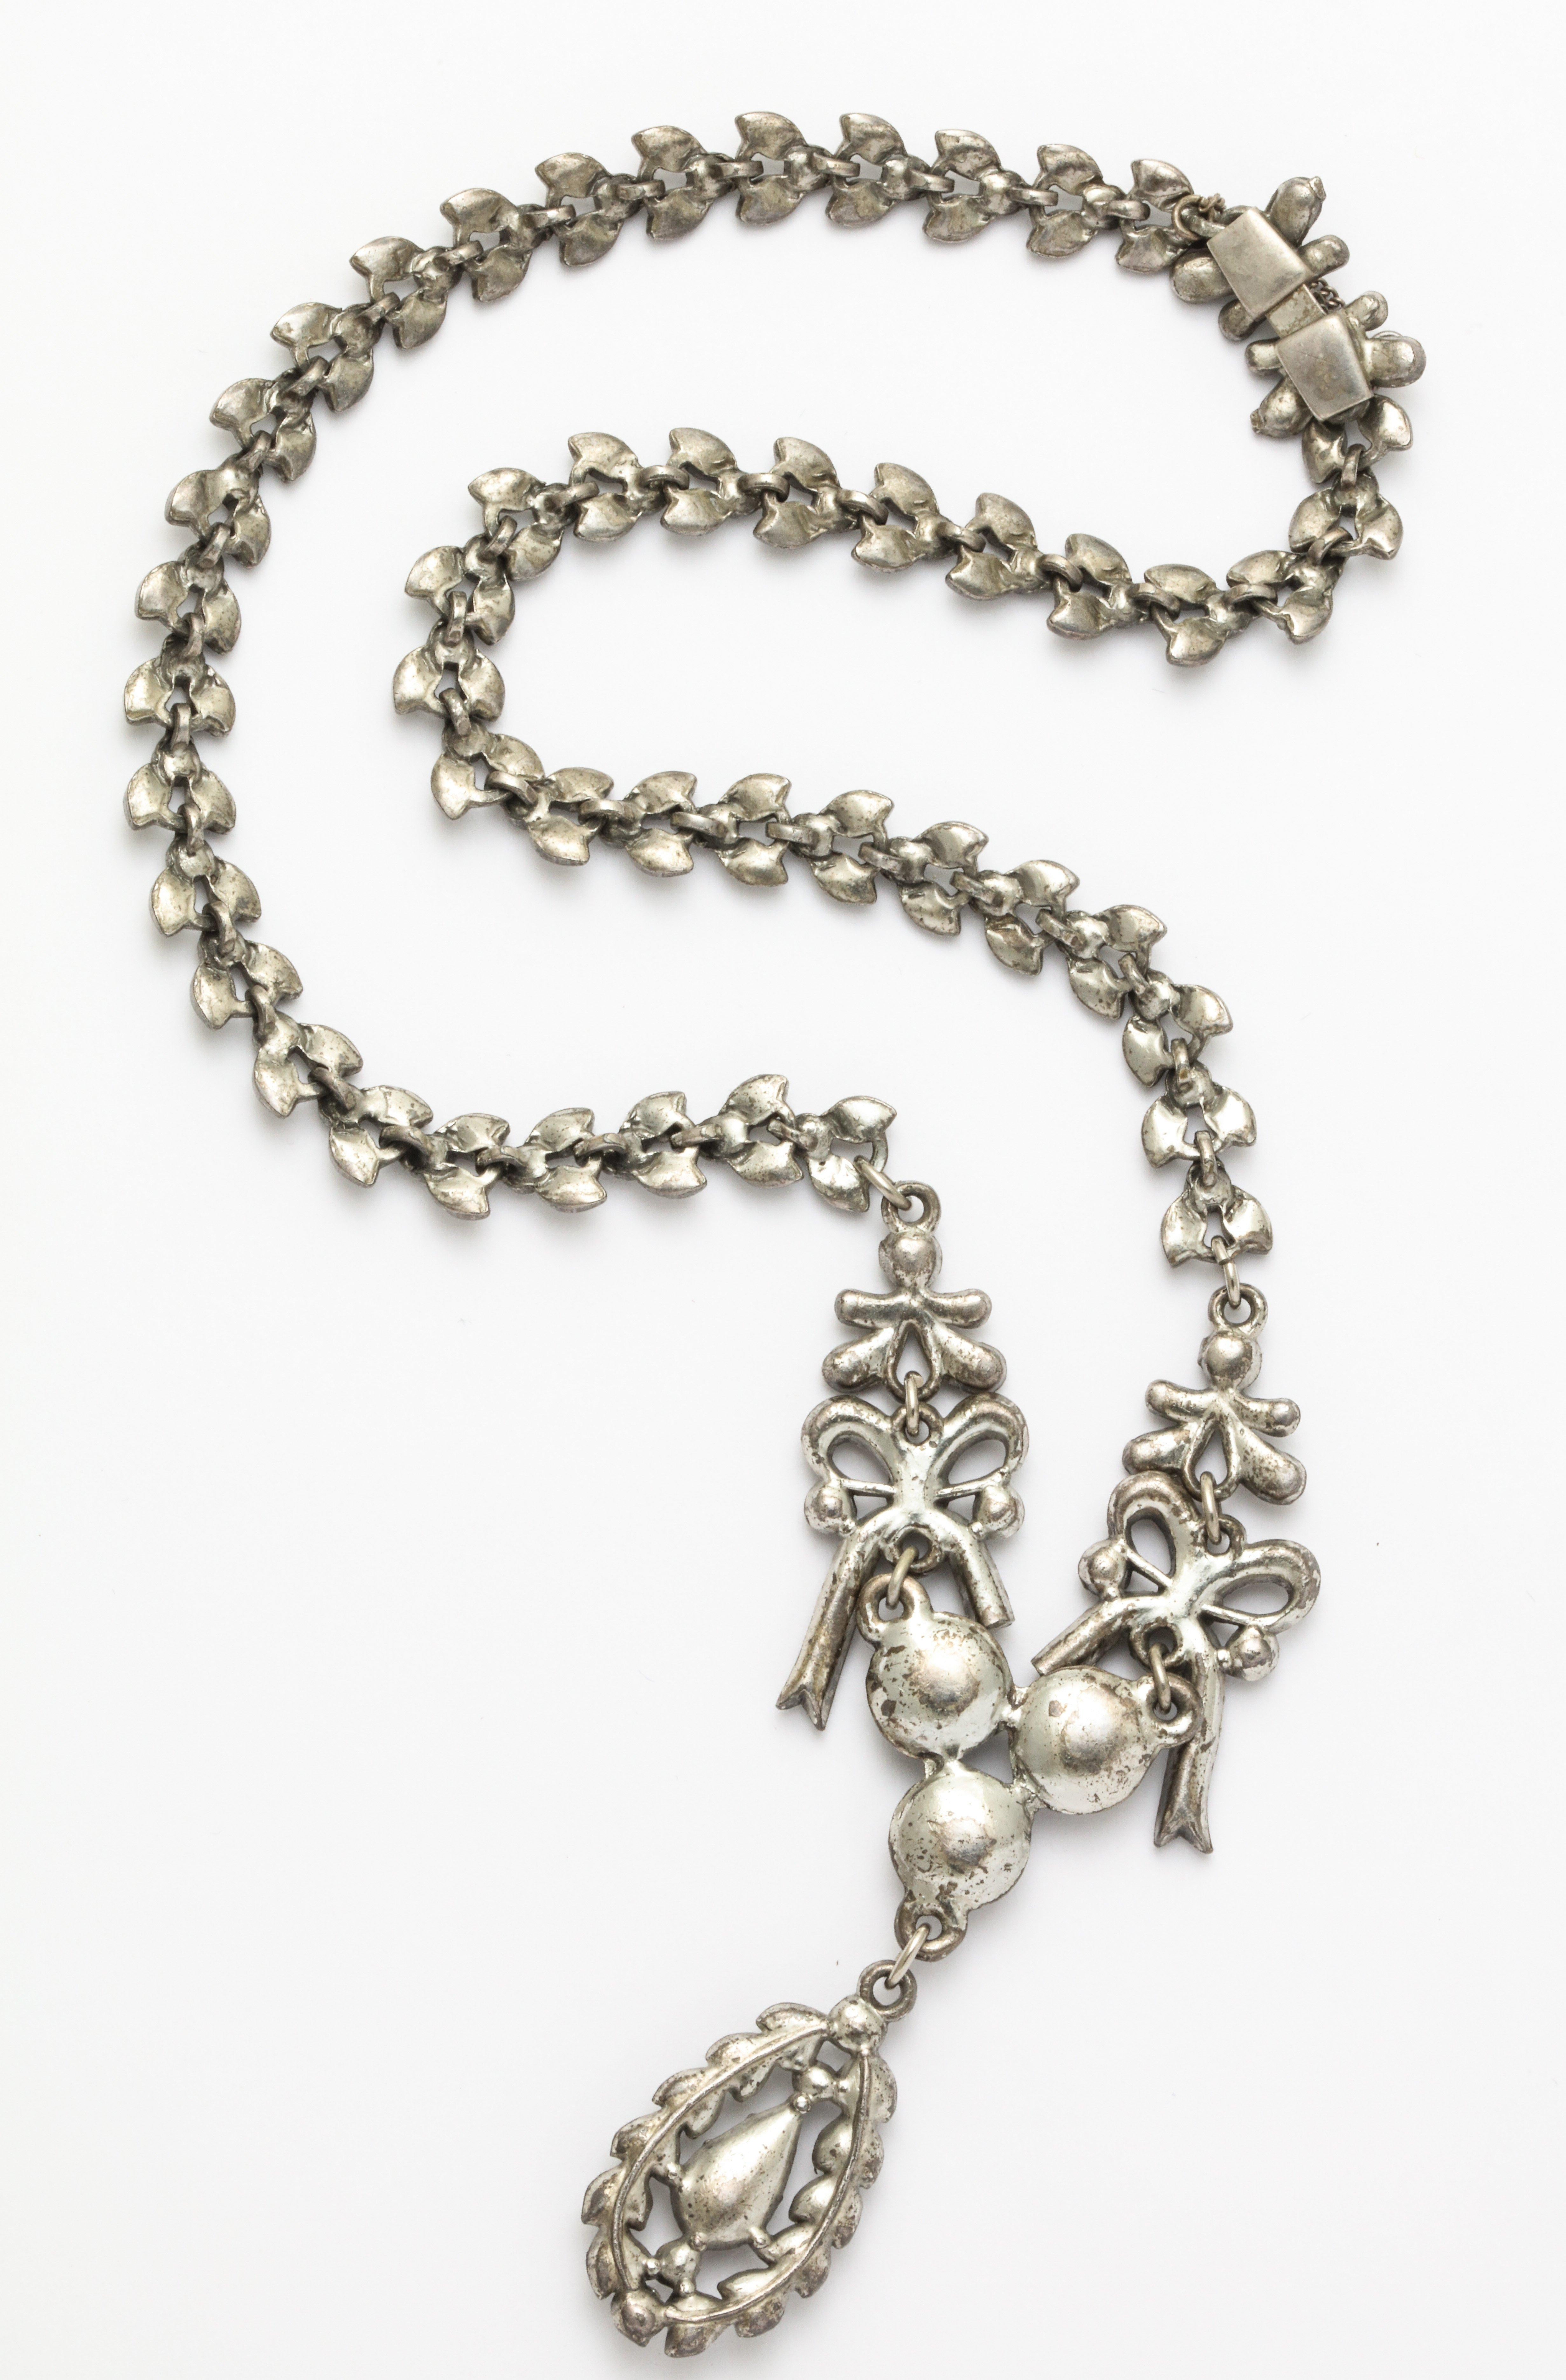 This early French Paste necklace has a lovely design with bows either side of an intricately set collier a center pendant 